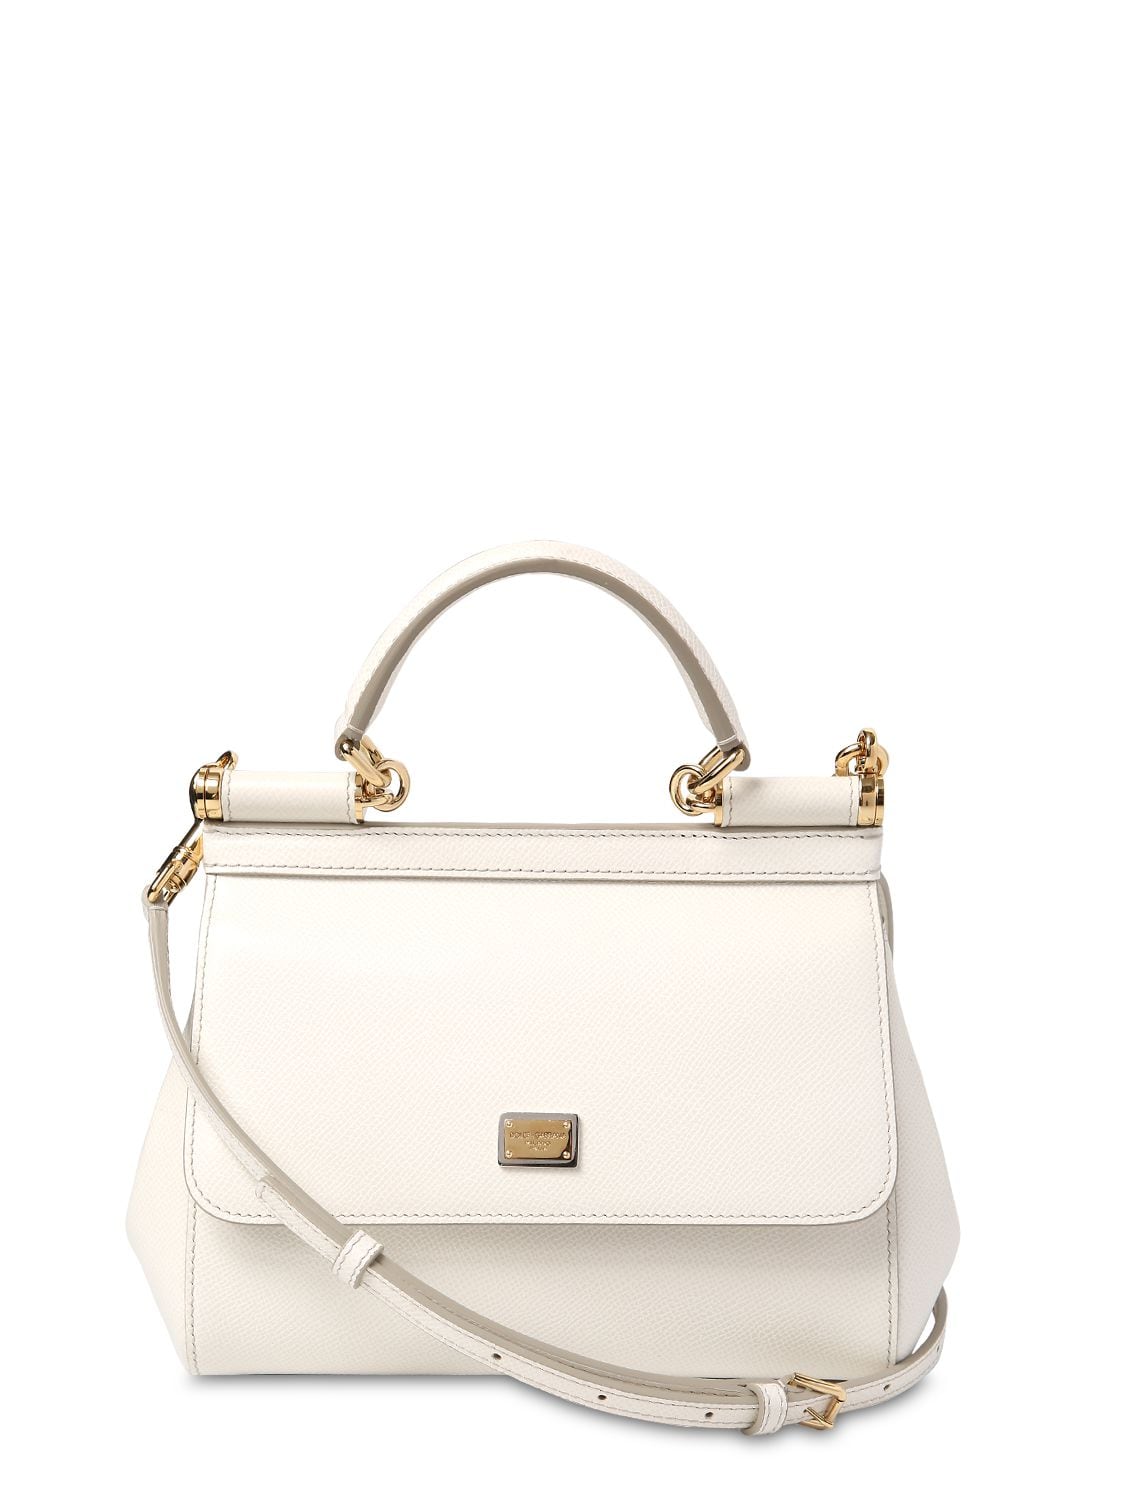 Dolce & Gabbana Small Sicily Dauphine Leather Bag In White